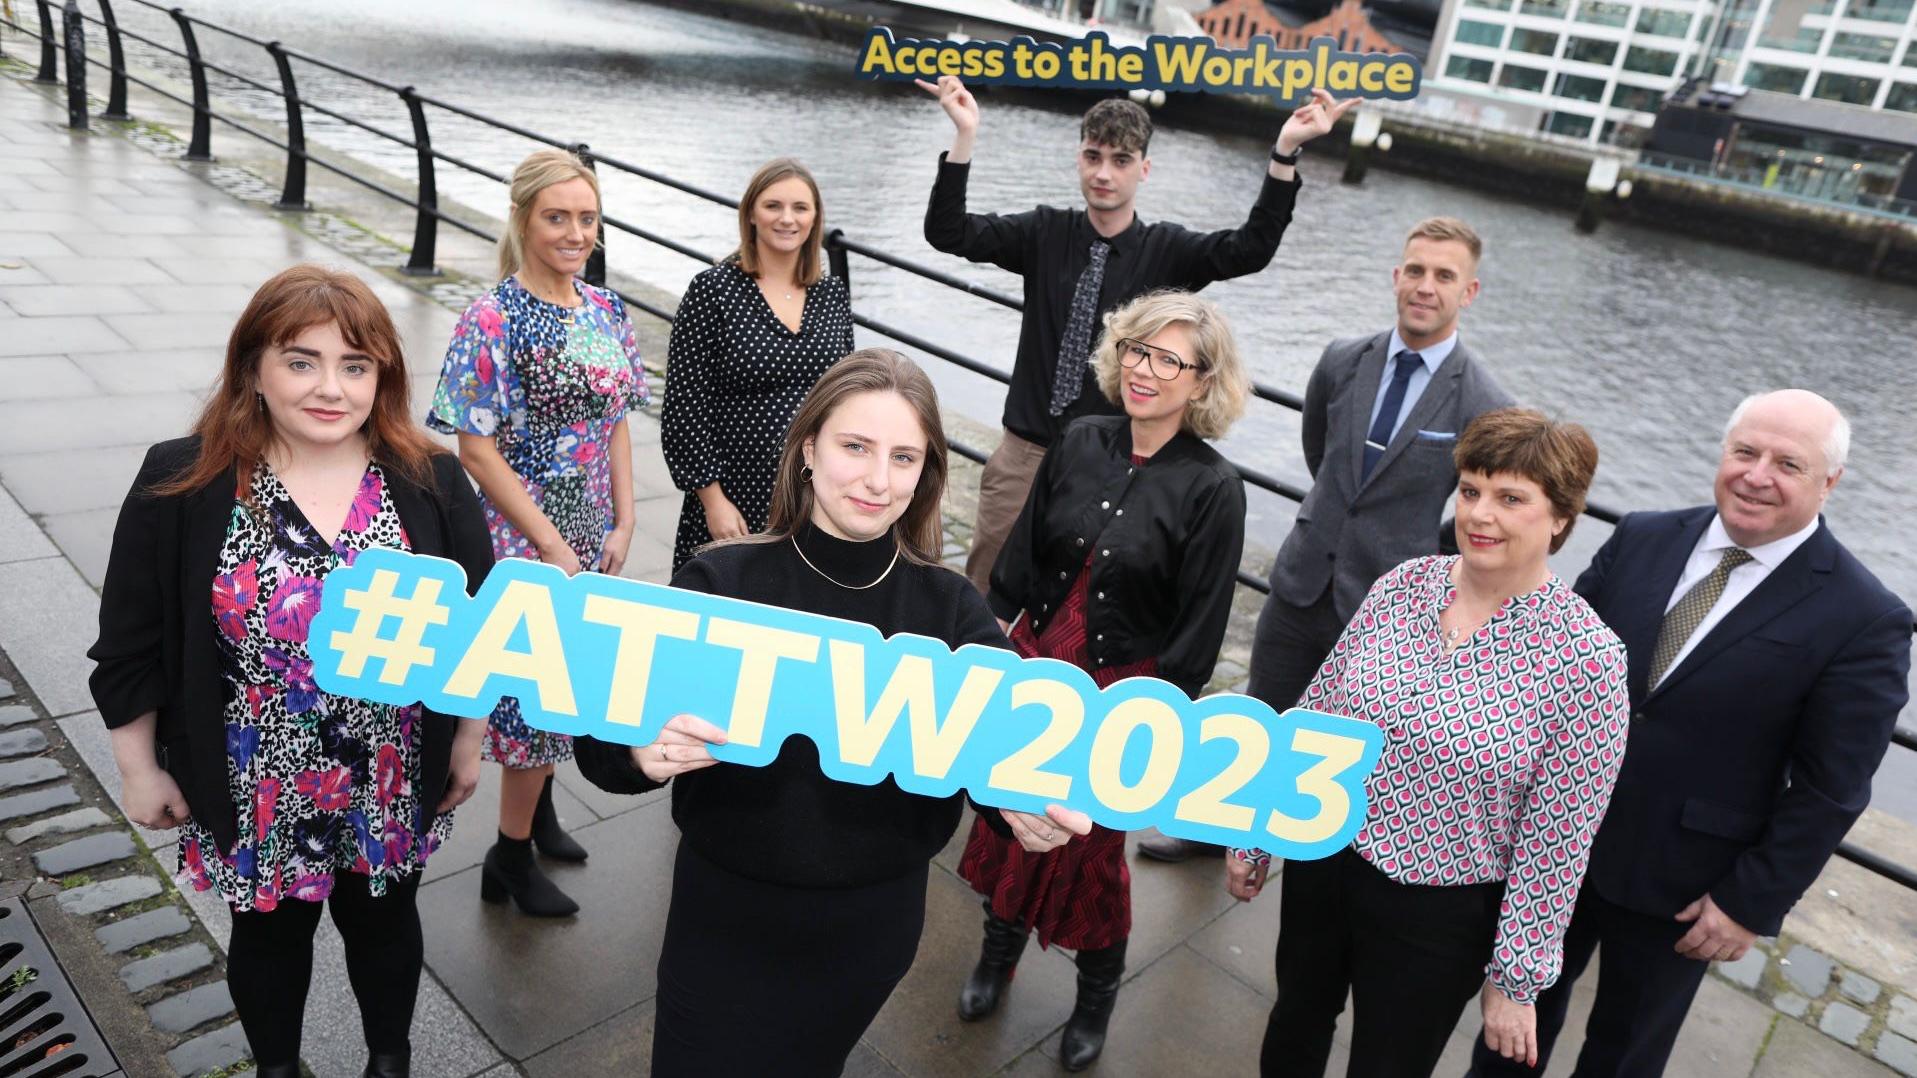 Shows students, staff and employers at the launch of Access to the Workplace Programme for 2023